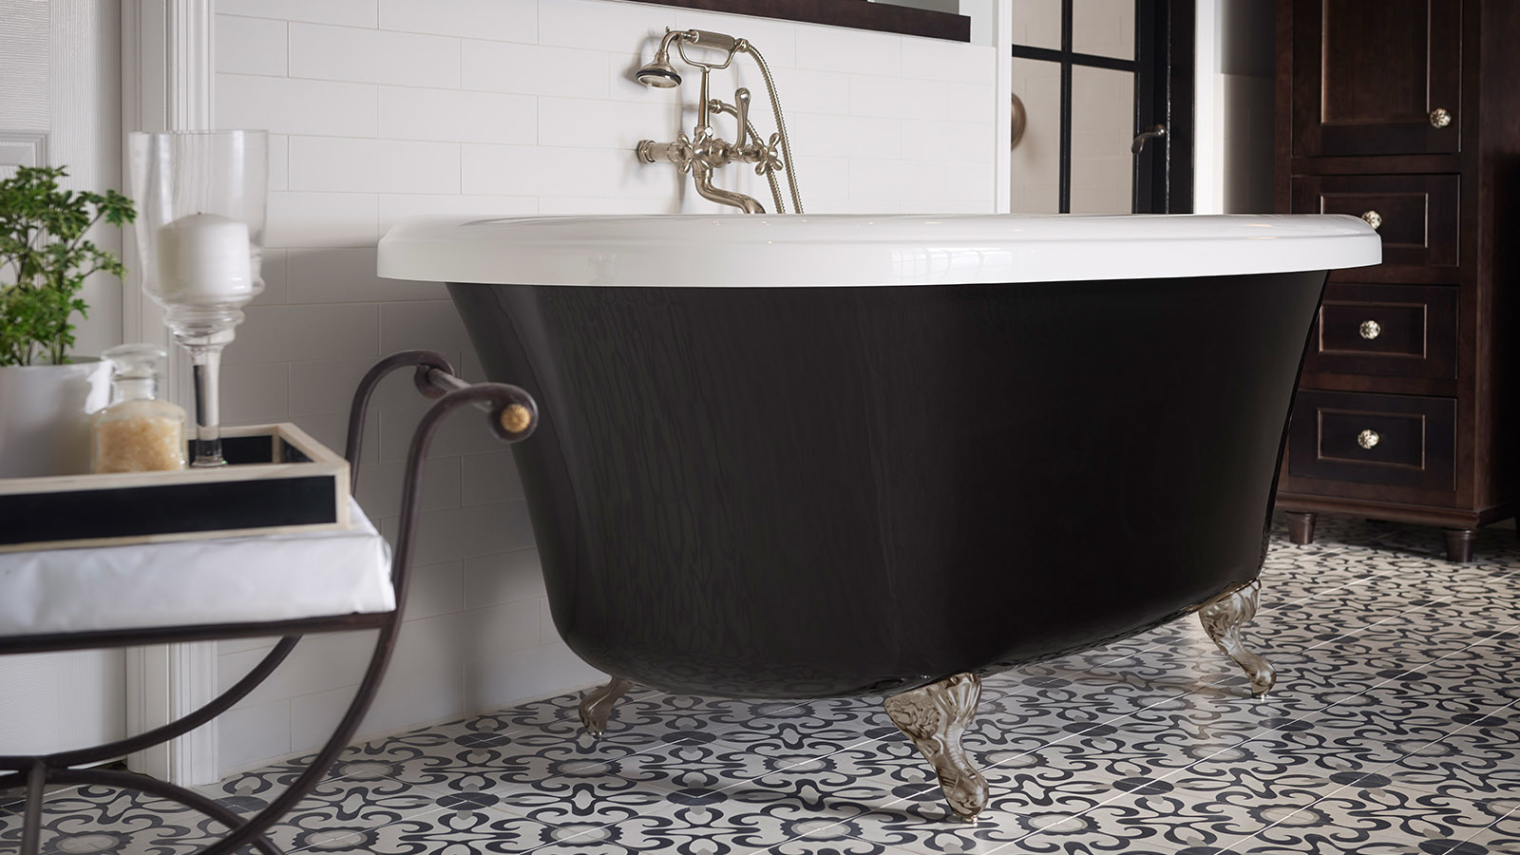 Image of a free standing tub with legs and a dark design.